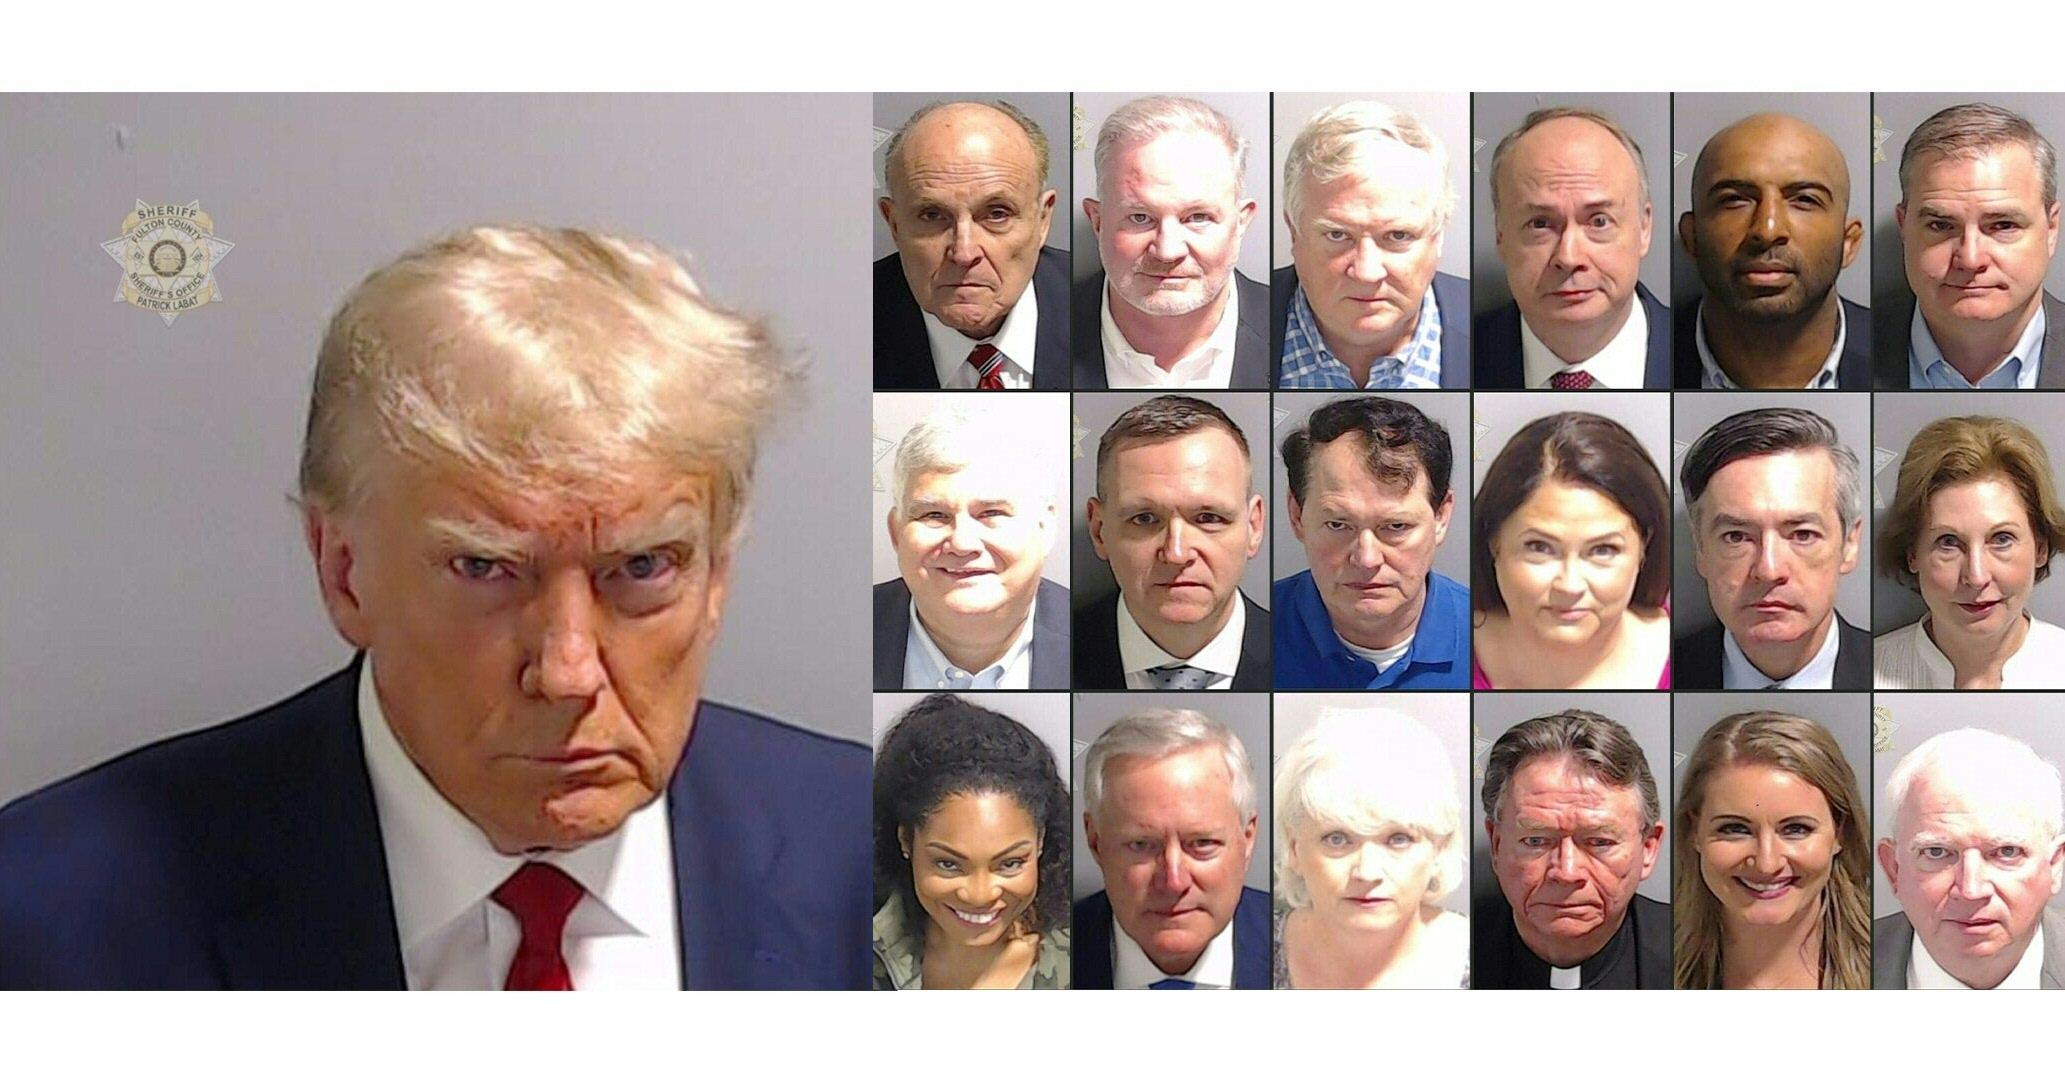 (COMBO) This combination of pictures created on August 25, 2023 shows the booking photos released by the Fulton County Sheriff's Office of former US President Donald Trump (L),(top L to R) former New York City Mayor and attorney of former US President Donald Trump, Rudy Giuliani, poll watcher Scott Hall, former US president Donald Trump lawyer Robert Cheeley, former Justice Department official Jeffrey Clark, executive director of Black Voices For Trump Floyd Harrison, Georgia state Senator Shawn Still,(center L to R) former chairman of the Georgia Republican Party David Shafer, former Donald Trump campaign official Mike Roman, former US president Donald Trump lawyer Ray Smith, former Coffee County elections supervisor Misty Hampton, former US president Donald Trump lawyer Kenneth Chesebro, former US president Donald Trump lawyer Sidney Powell, (bottom L to R) Chicago-based publicist Trevian Kutti, former US President Donald Trump's White House chief of staff Mark Meadows, former GOP chair for Coffee County and a member of the Georgia Republican Party's executive committee Cathy Latham, chaplain and former law enforcement officer Stephen Cliffgard Lee, former US president Donald Trump lawyer Jenna Ellis, former US president Donald Trump lawyer John Eastman. - Former US president Donald Trump was arrested at a Georgia jail on August 24, 2023 on racketeering and conspiracy charges and released on a $200,000 bond after having a historic mug shot taken. Trump, who is accused of colluding with 18 other defendants to overturn the 2020 election result in the southern state, spent less than 30 minutes inside Atlanta's Fulton County Jail before leaving in a motorcade for the airport. Like the other defendants in the case who have surrendered so far, the 77-year-old Trump had his mug shot taken during the booking process -- a first for any serving or former US president. (Photo by - and Handout / FULTON COUNTY SHERIFF'S OFFICE / AFP) / RESTRICTED TO EDITORIAL USE - MANDATORY C